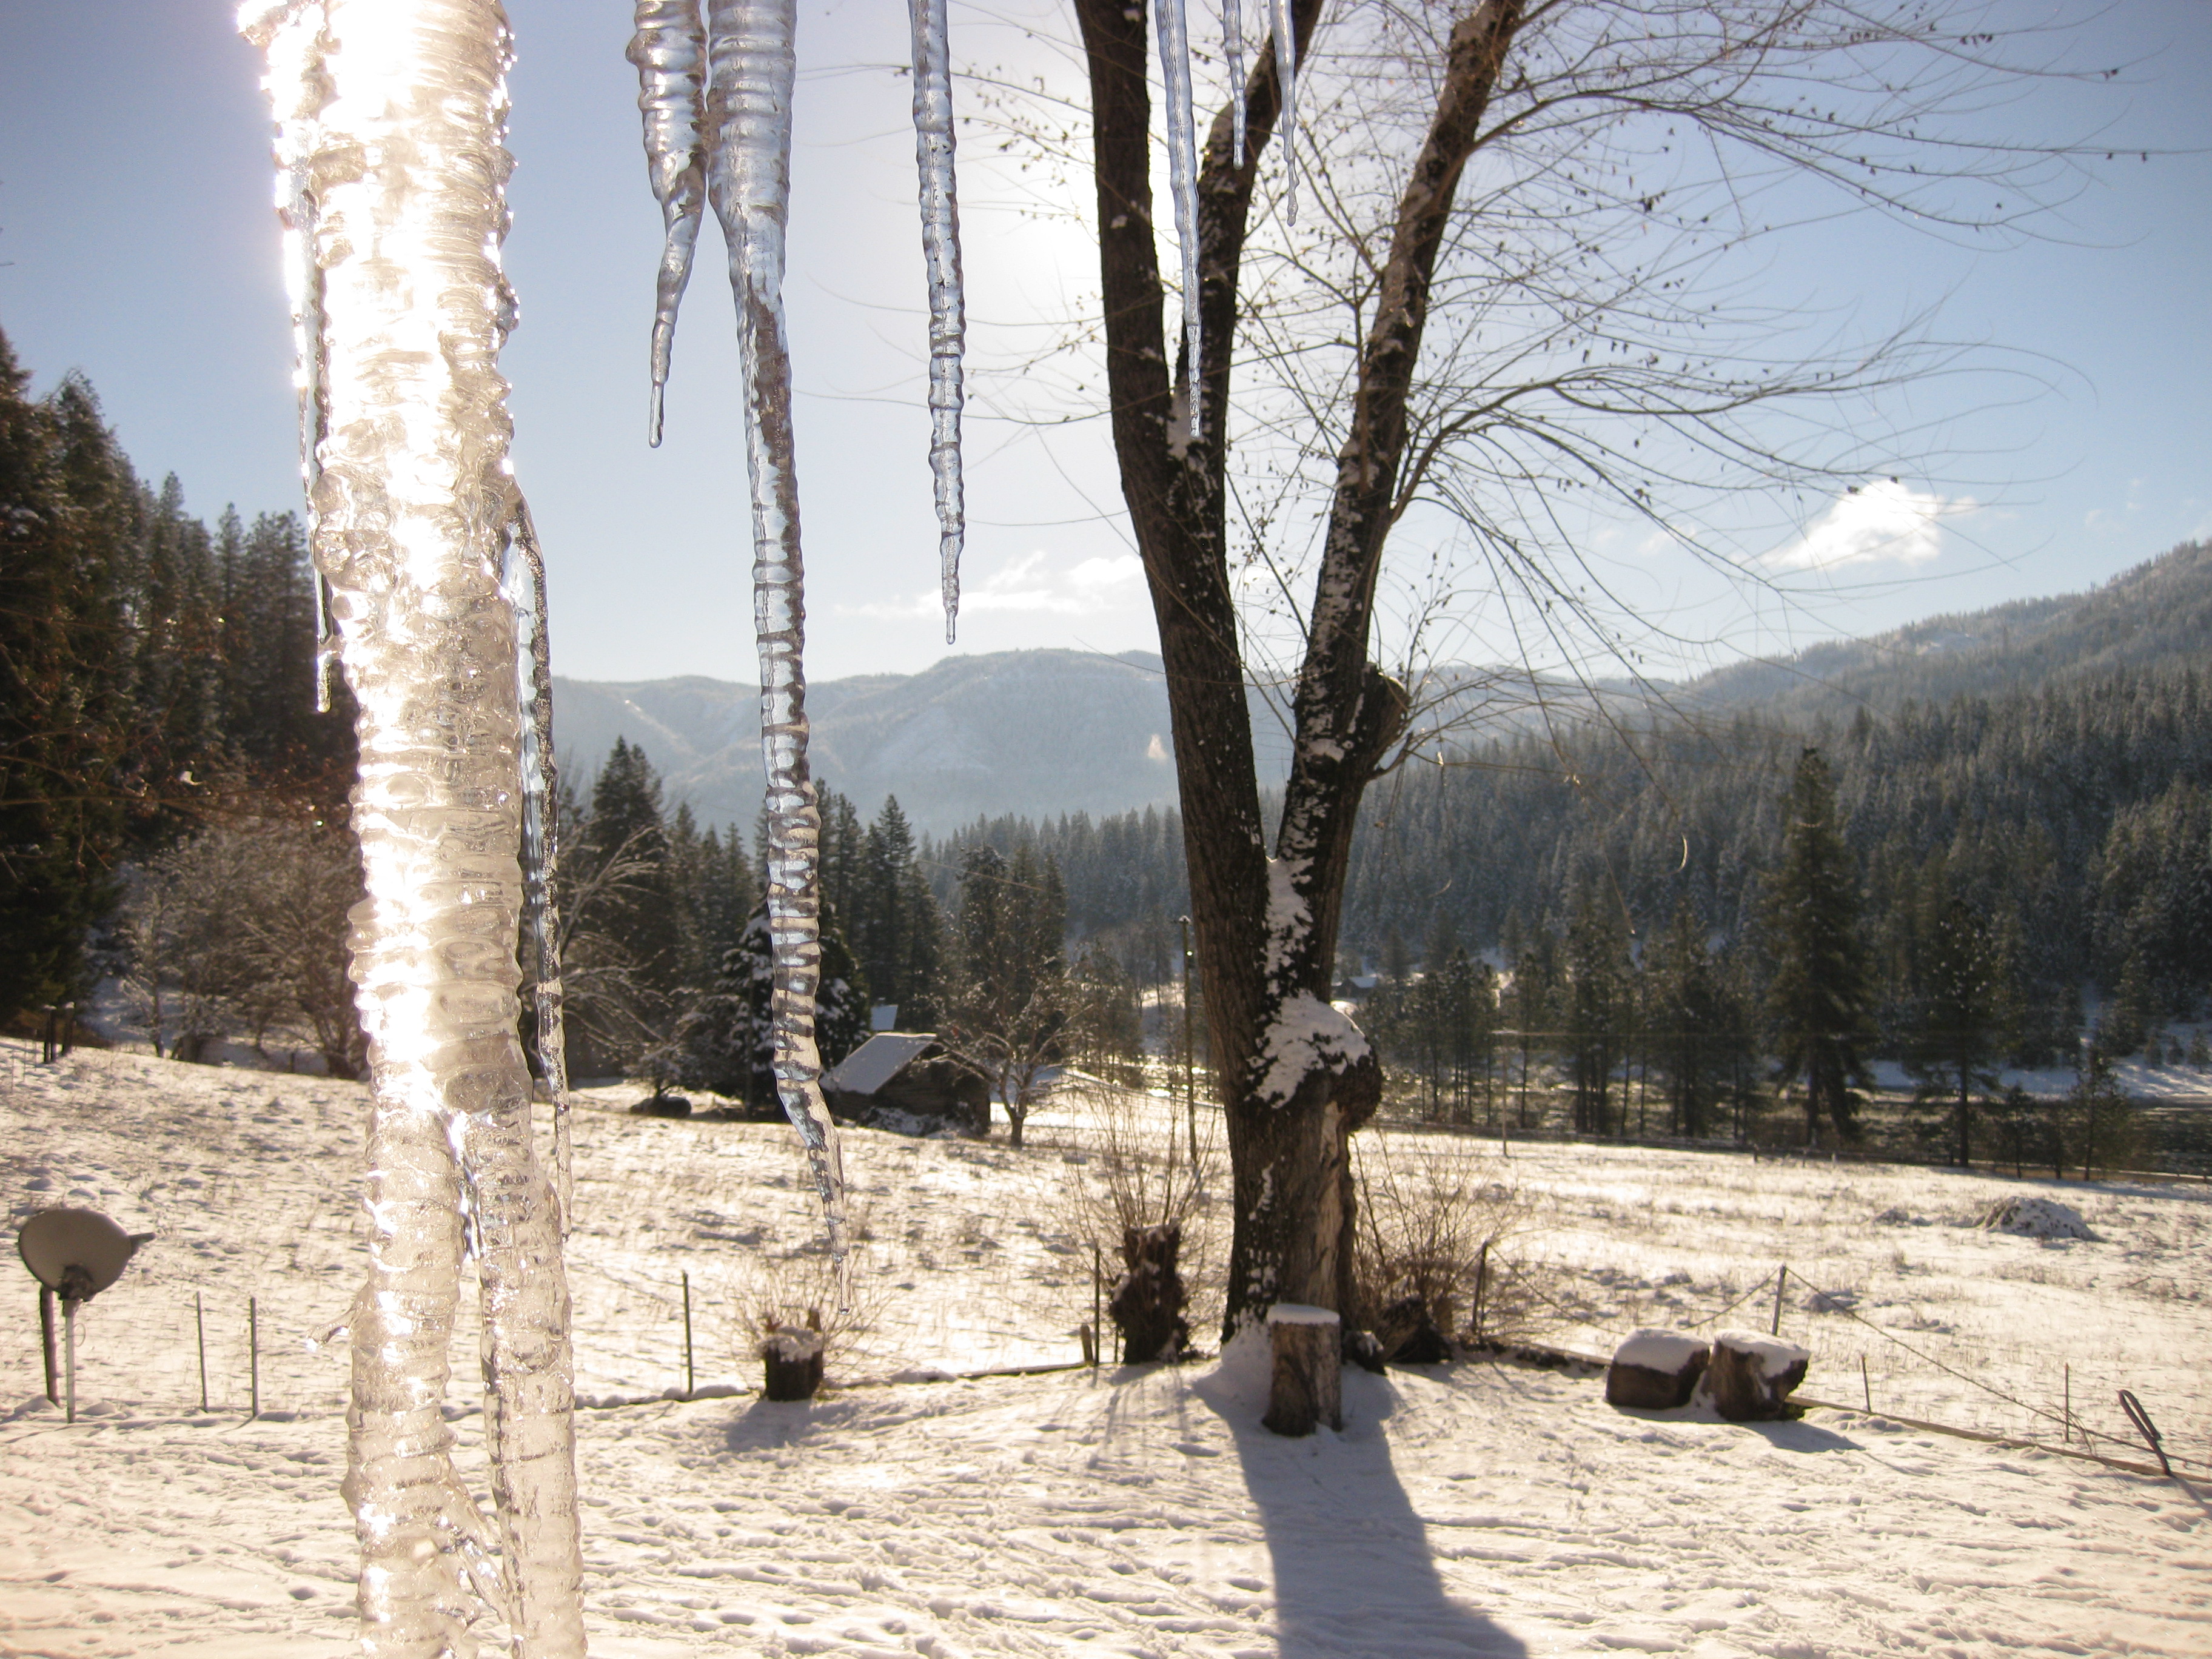 Icicle-in-front-of-winter-forest.jpg